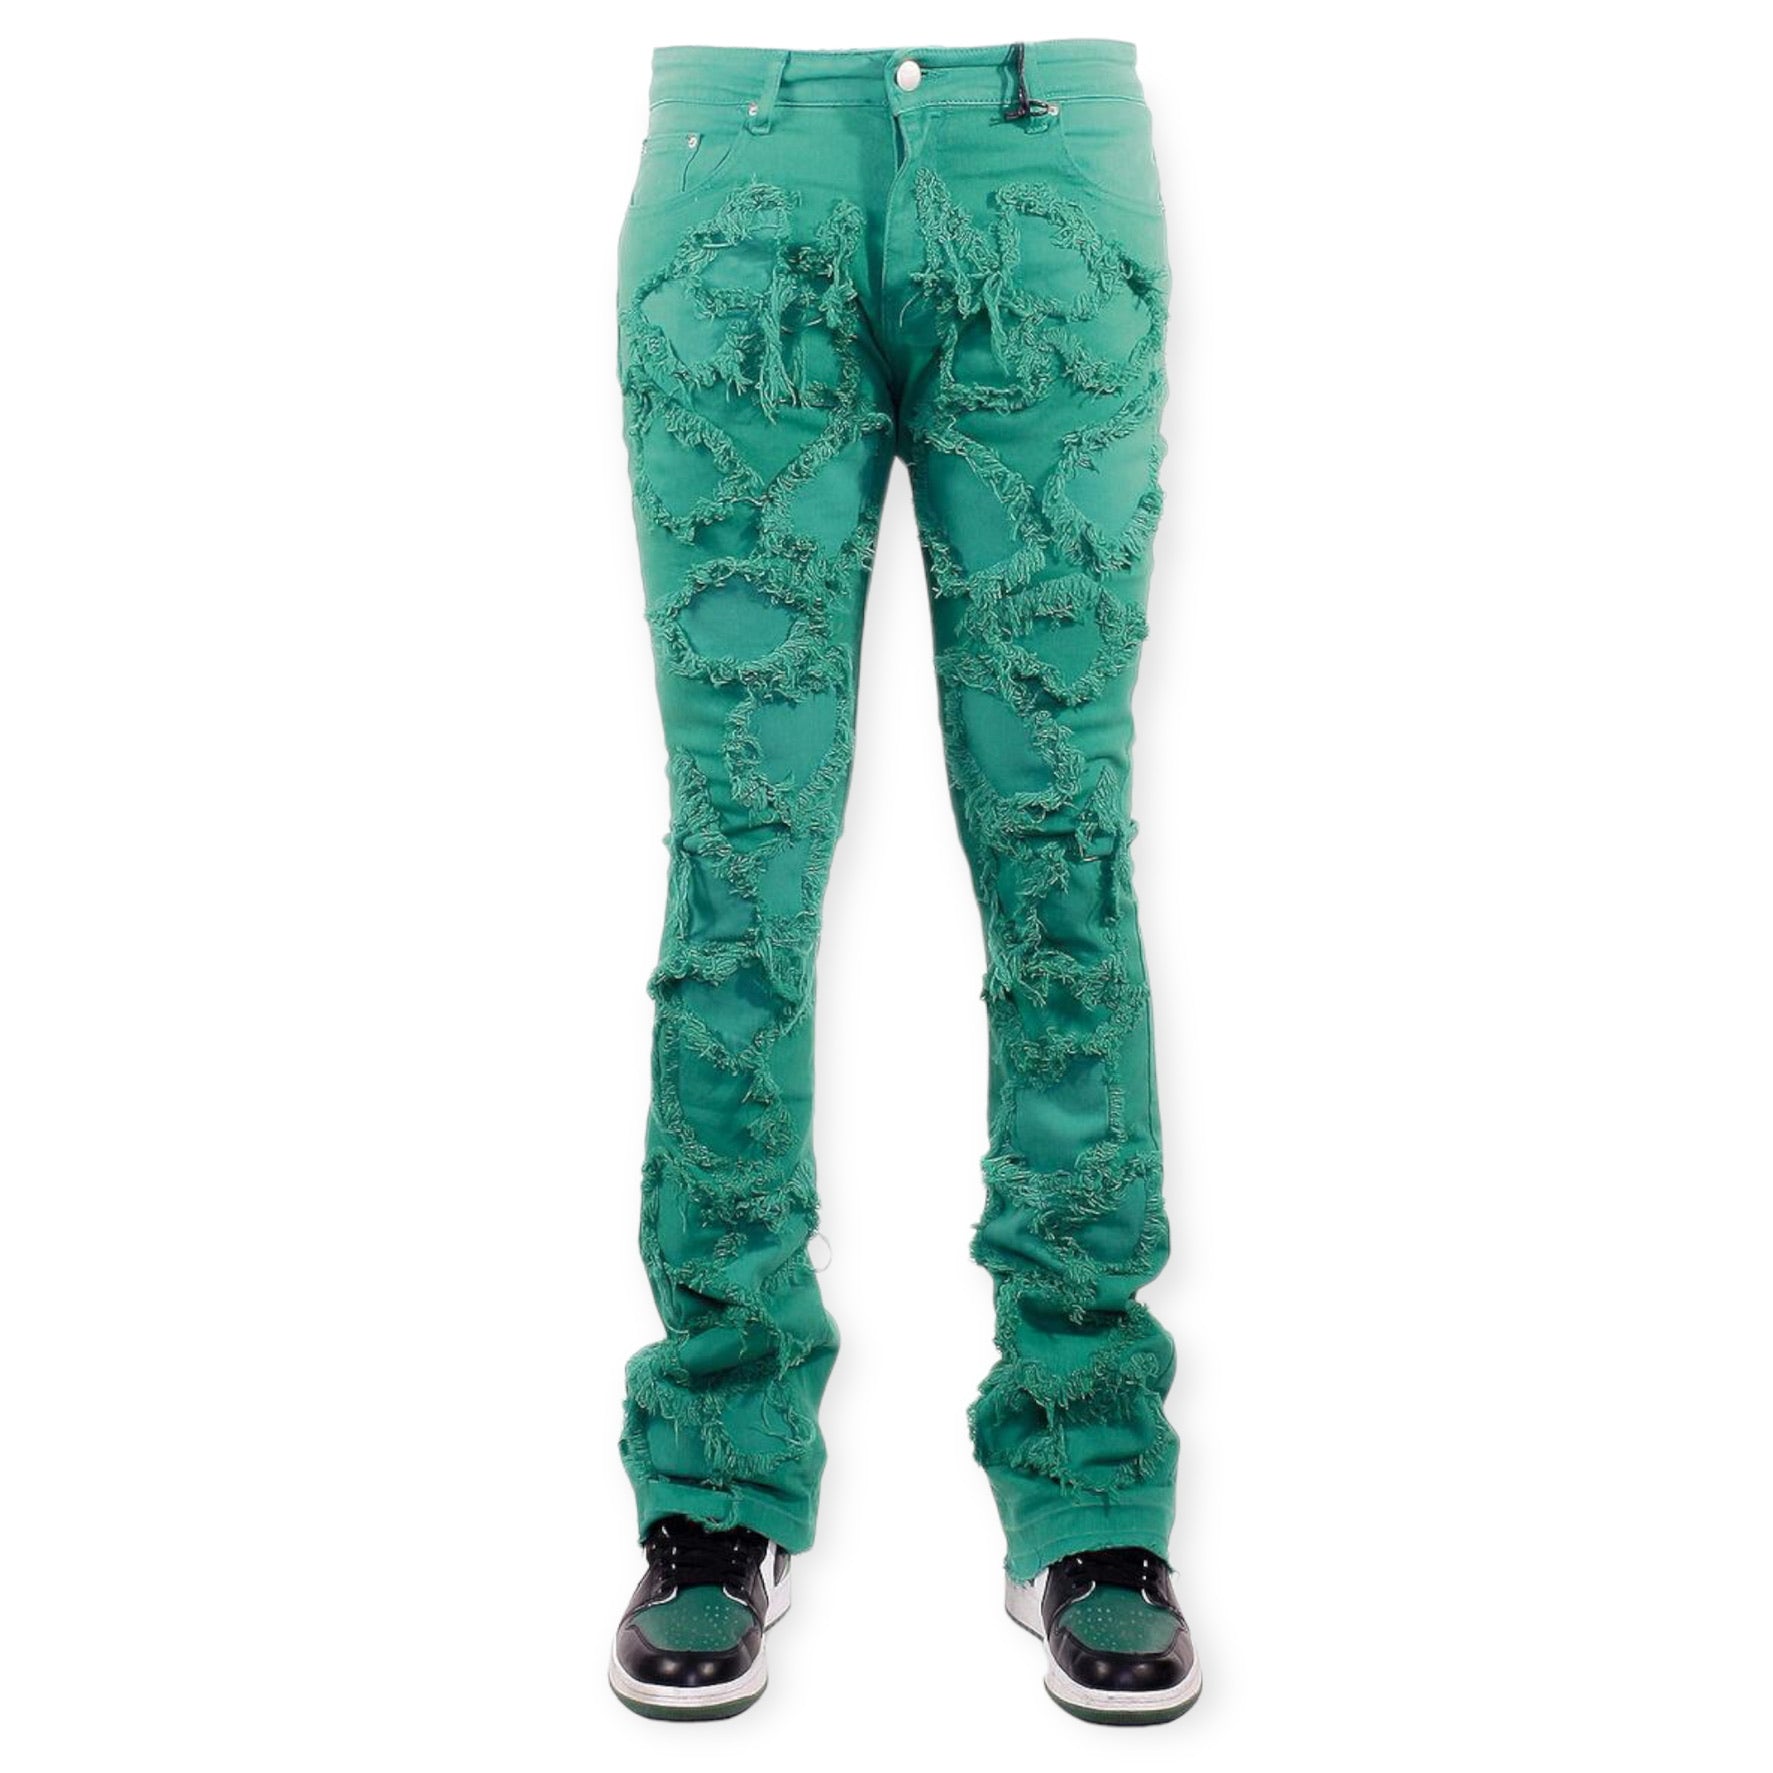 COOPER 9: 508 Maze Stacked Jeans 2250833